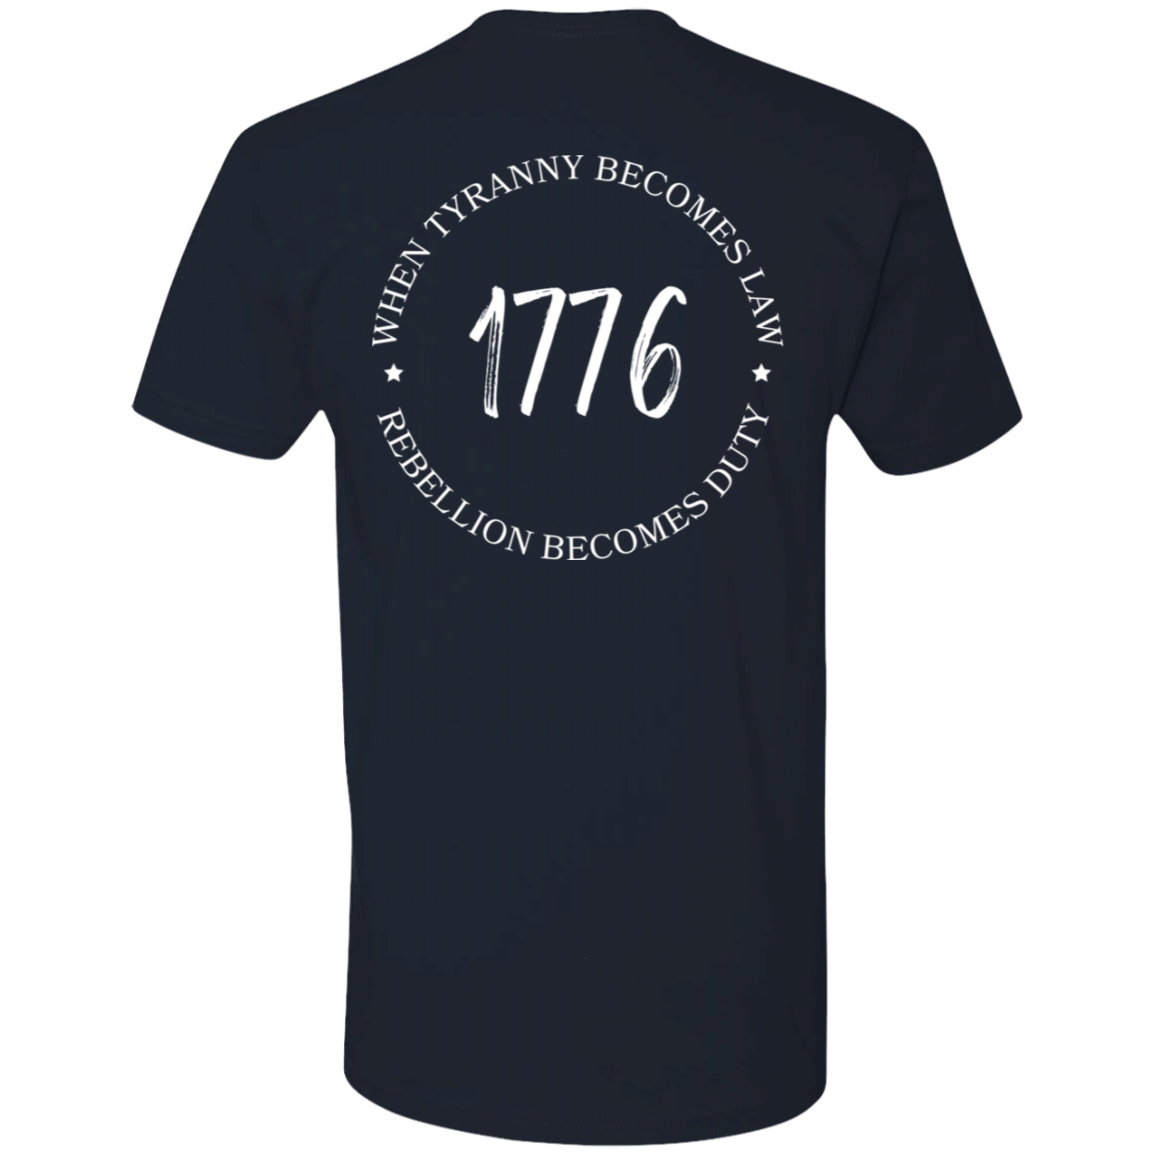 Tyranny Becomes Law T-Shirt - Unisex